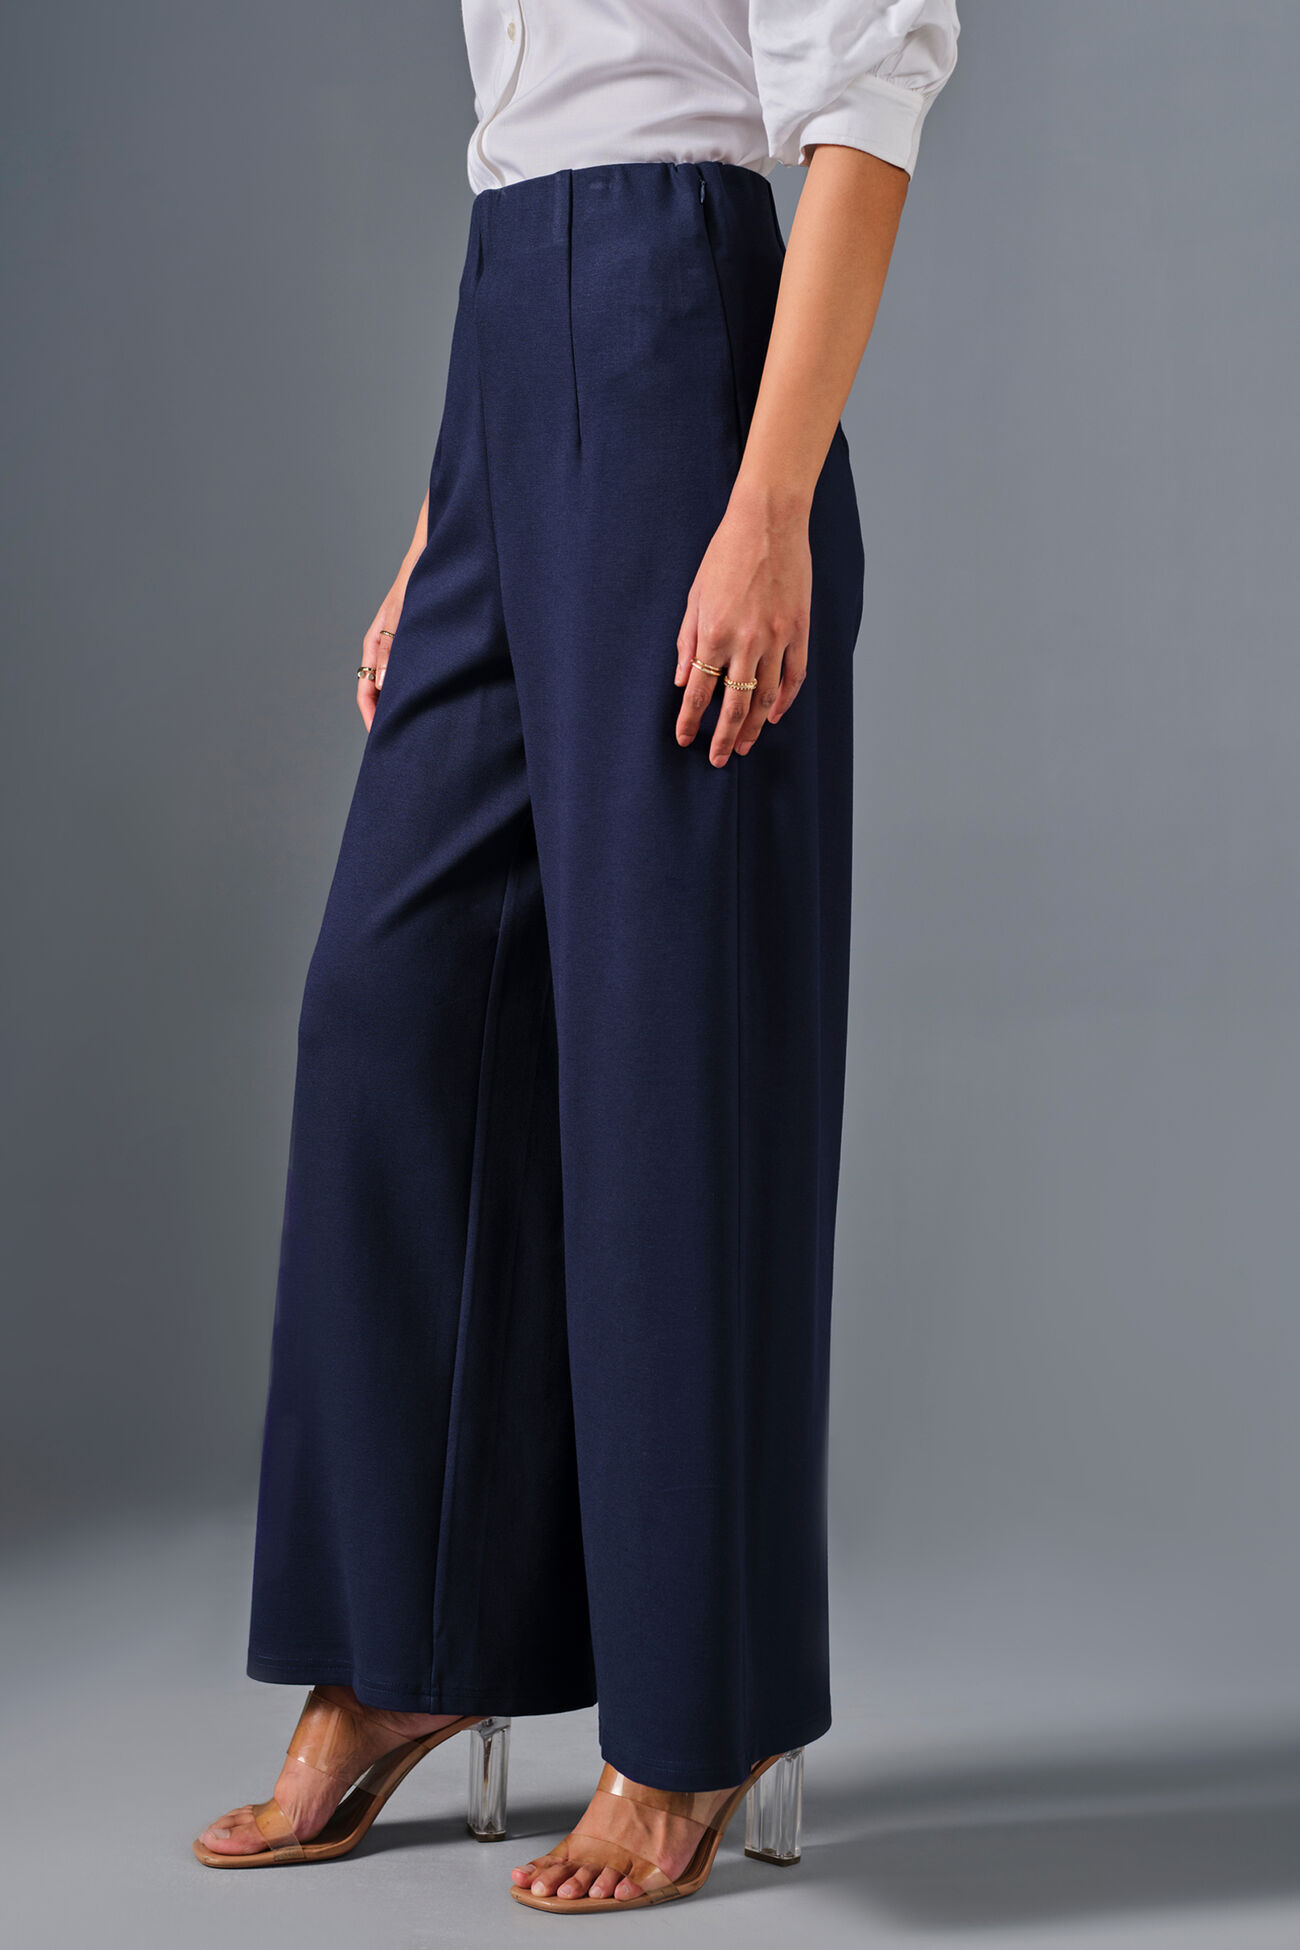 Slay Everyday Trousers, Navy Blue, image 4